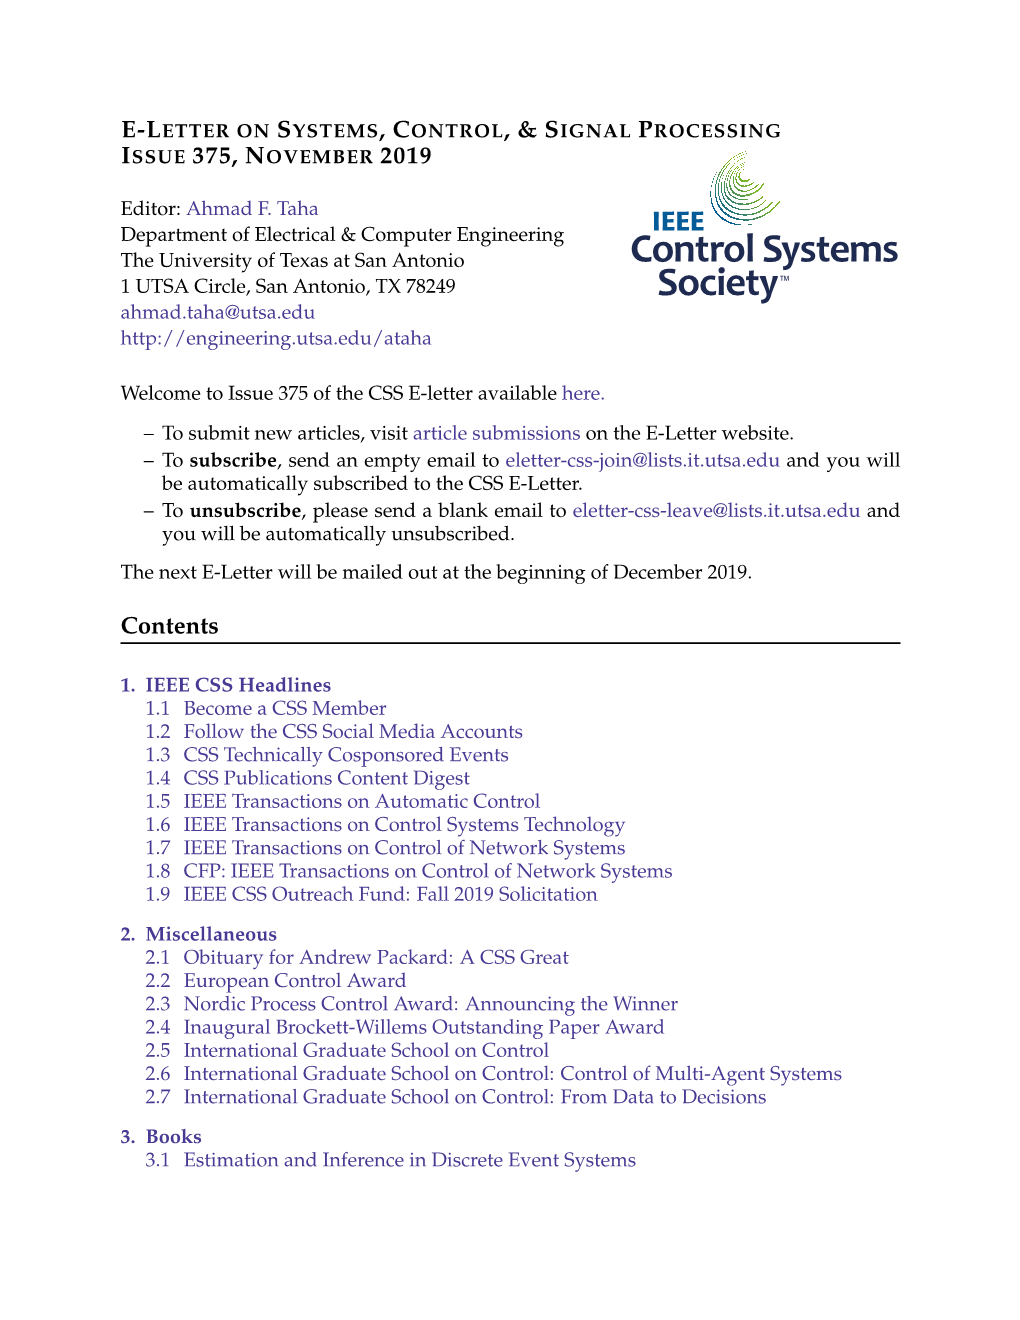 E-Letteron Systems,Control,&Signal Processing Issue 375, November 2019